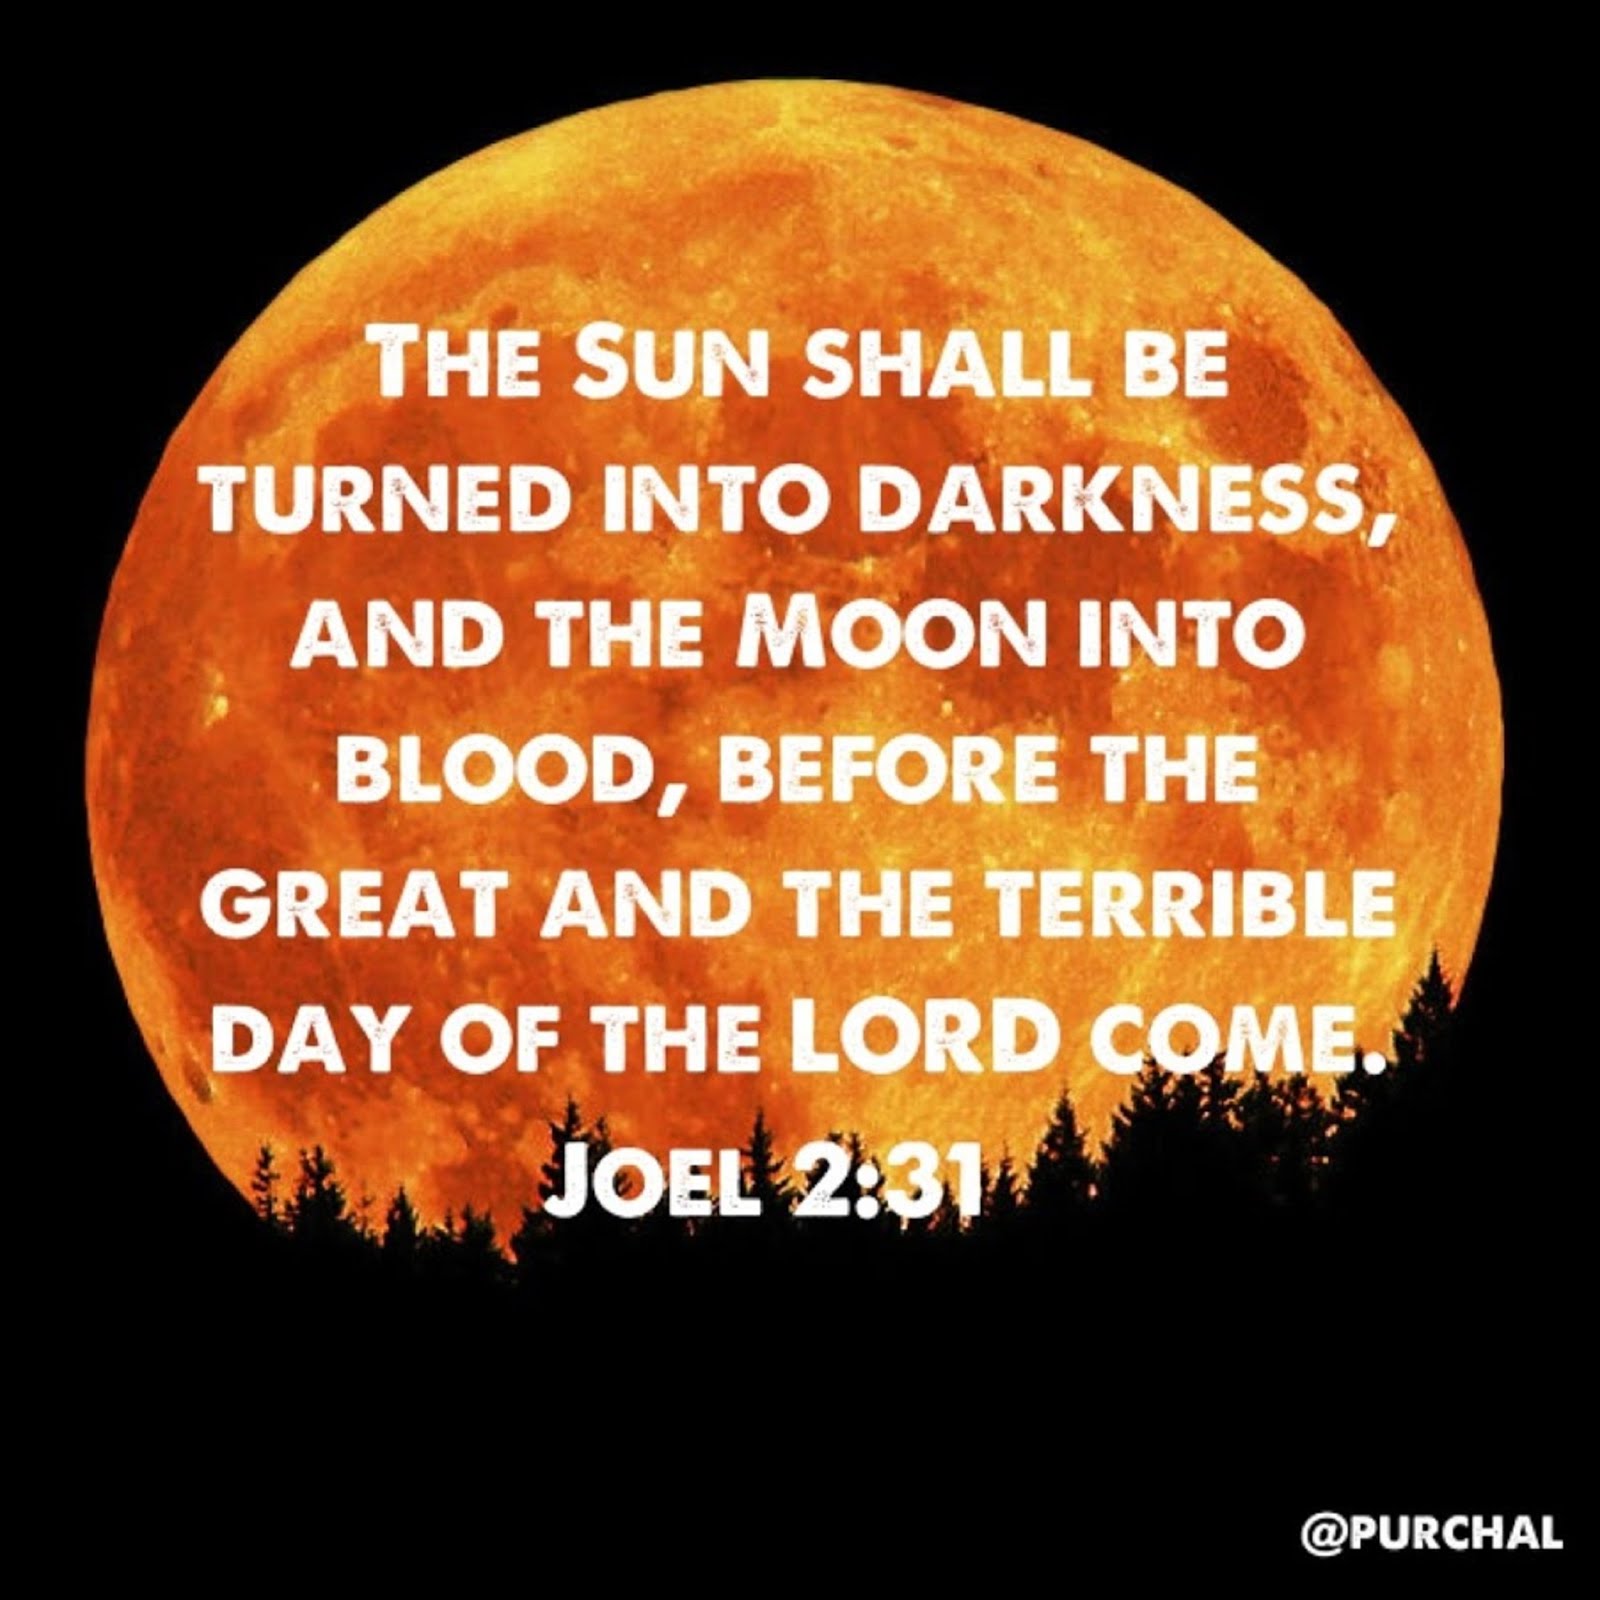 THE SUN SHALL BE TURNED INTO DARKNESS